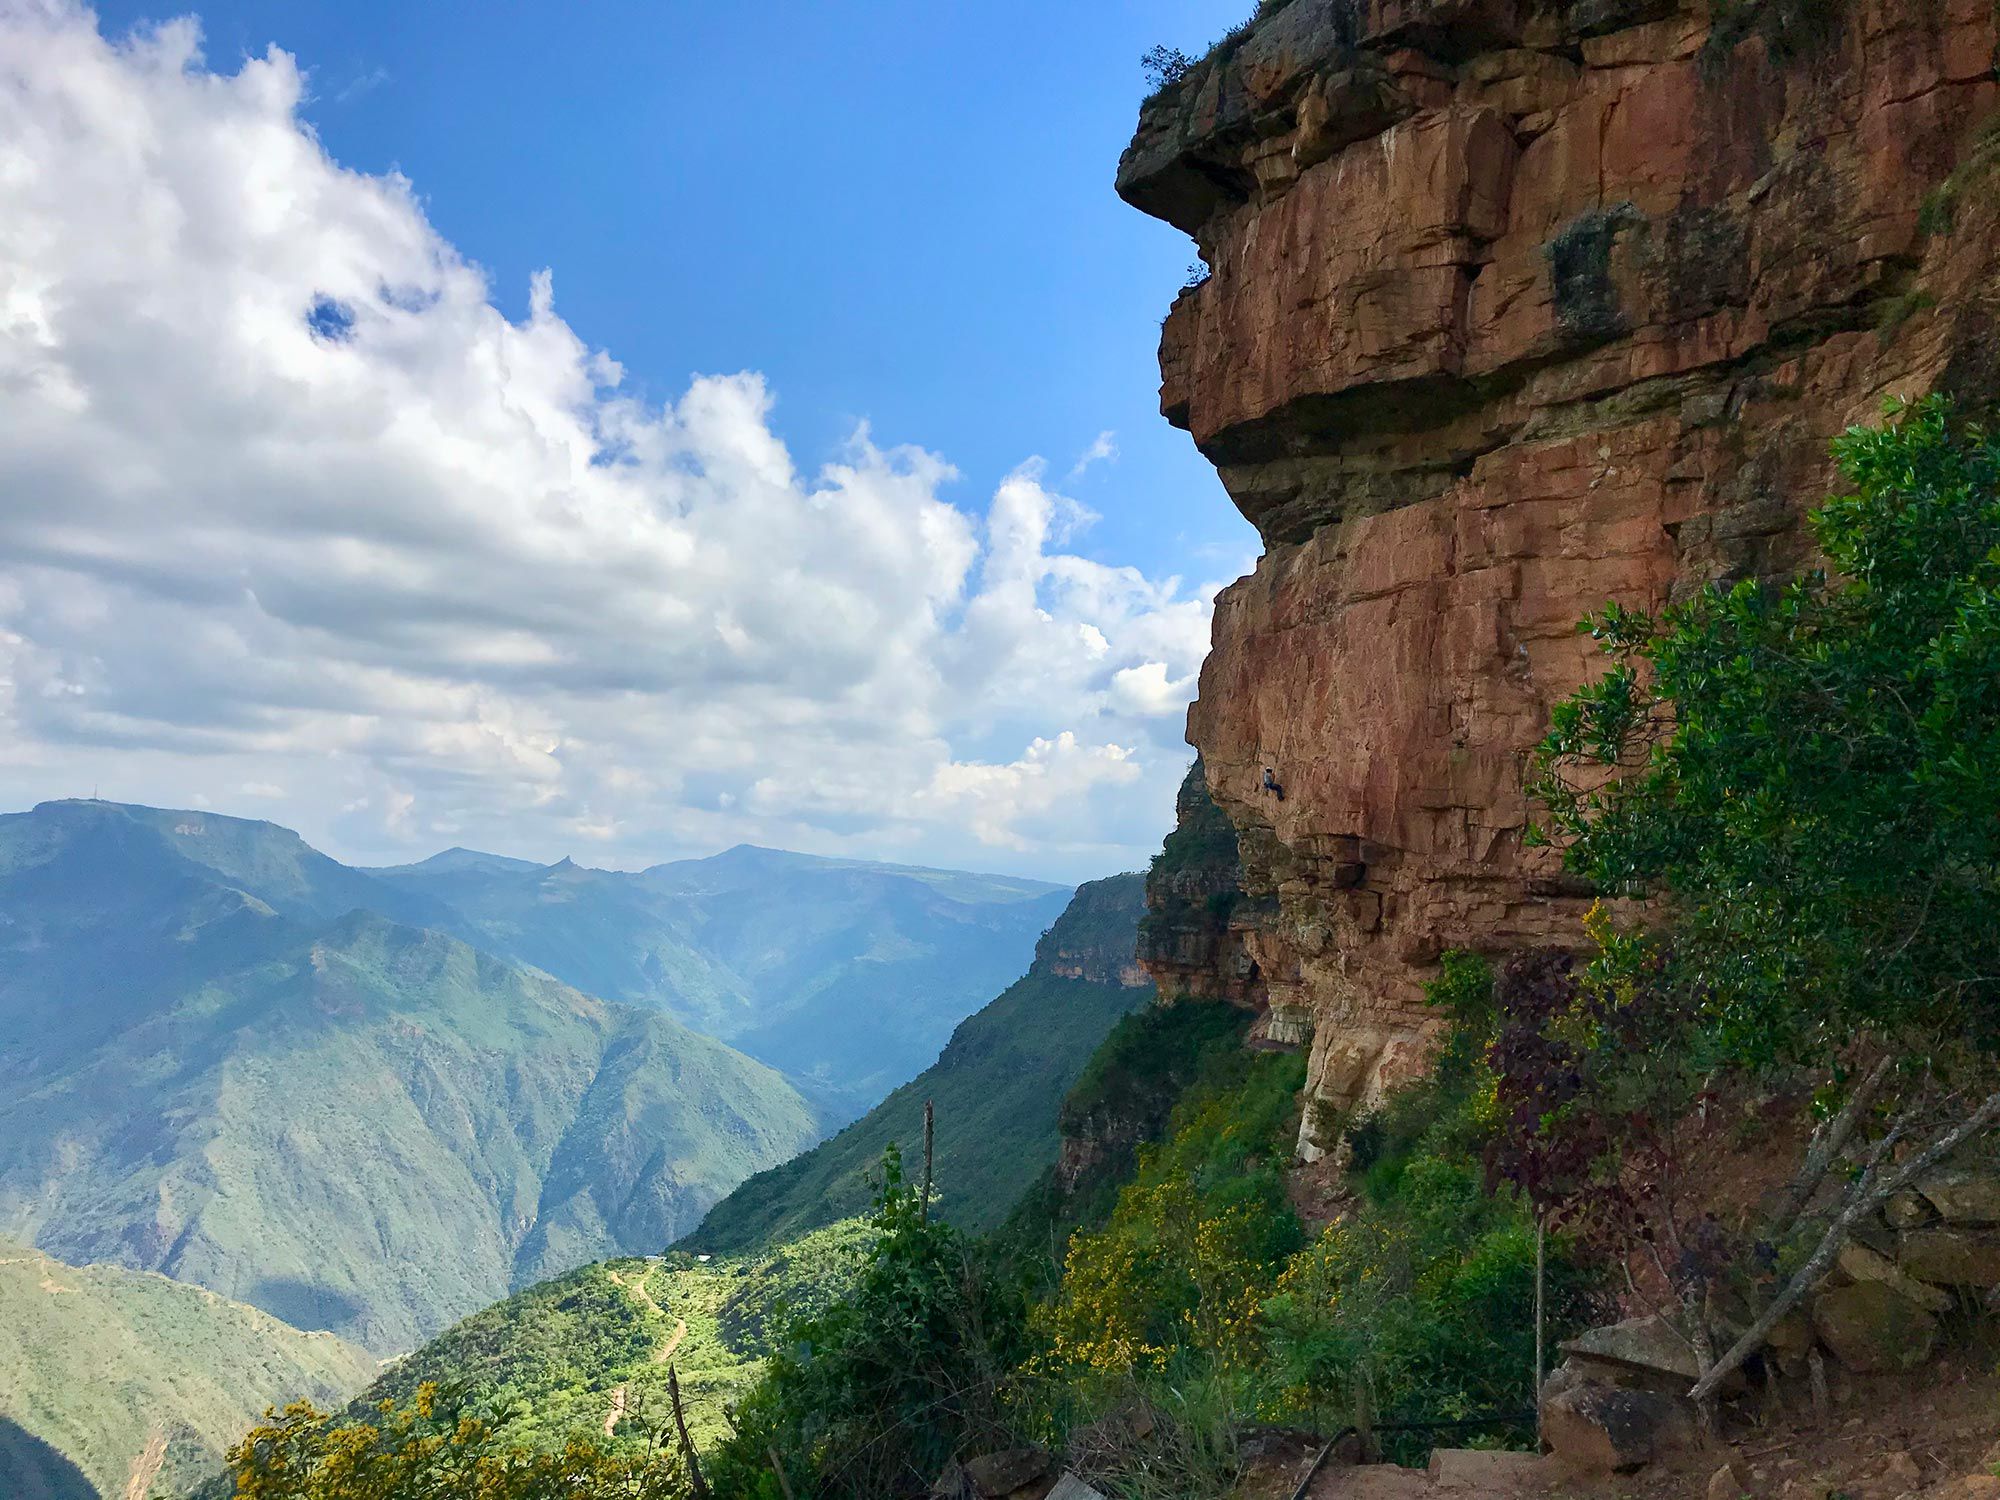 Orange canyon walls contrast the deep blue skies of the desert ecosystem located in northeastern Colombia.